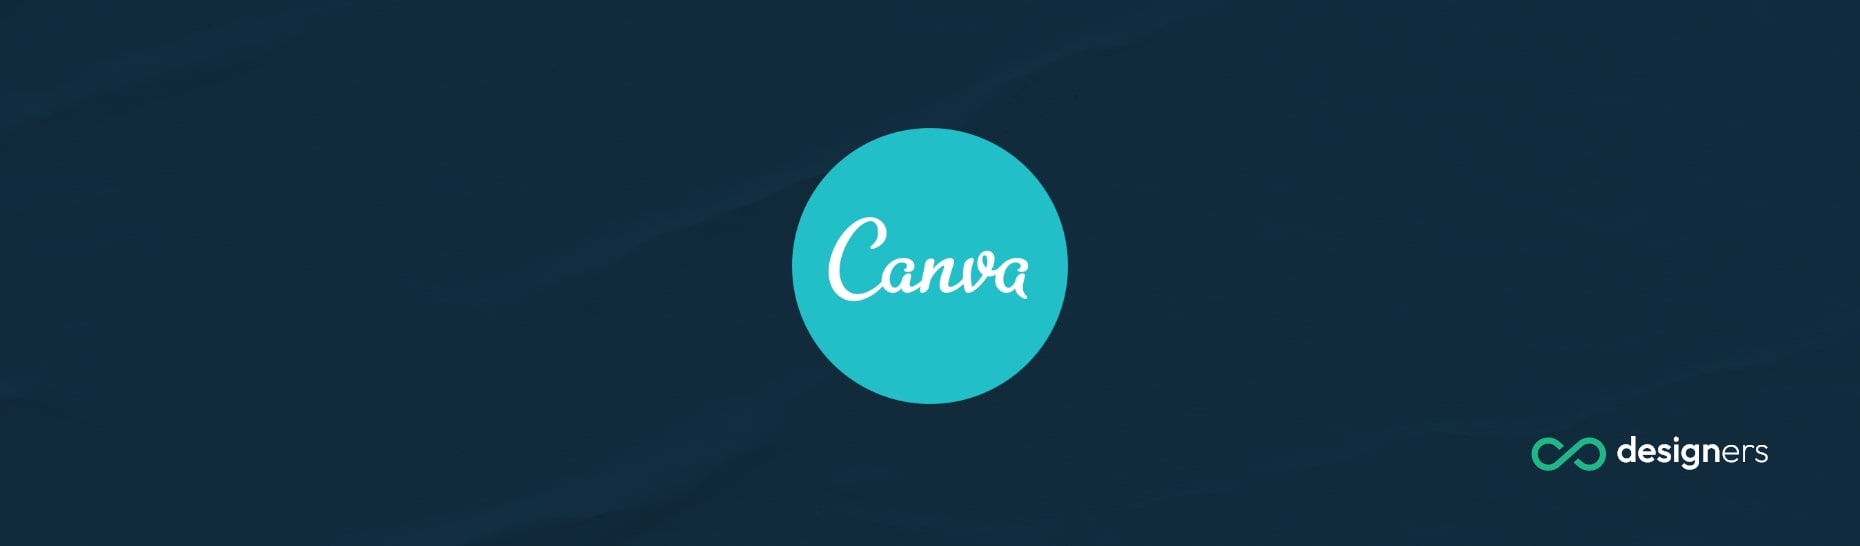 Why Is Canva So Successful?